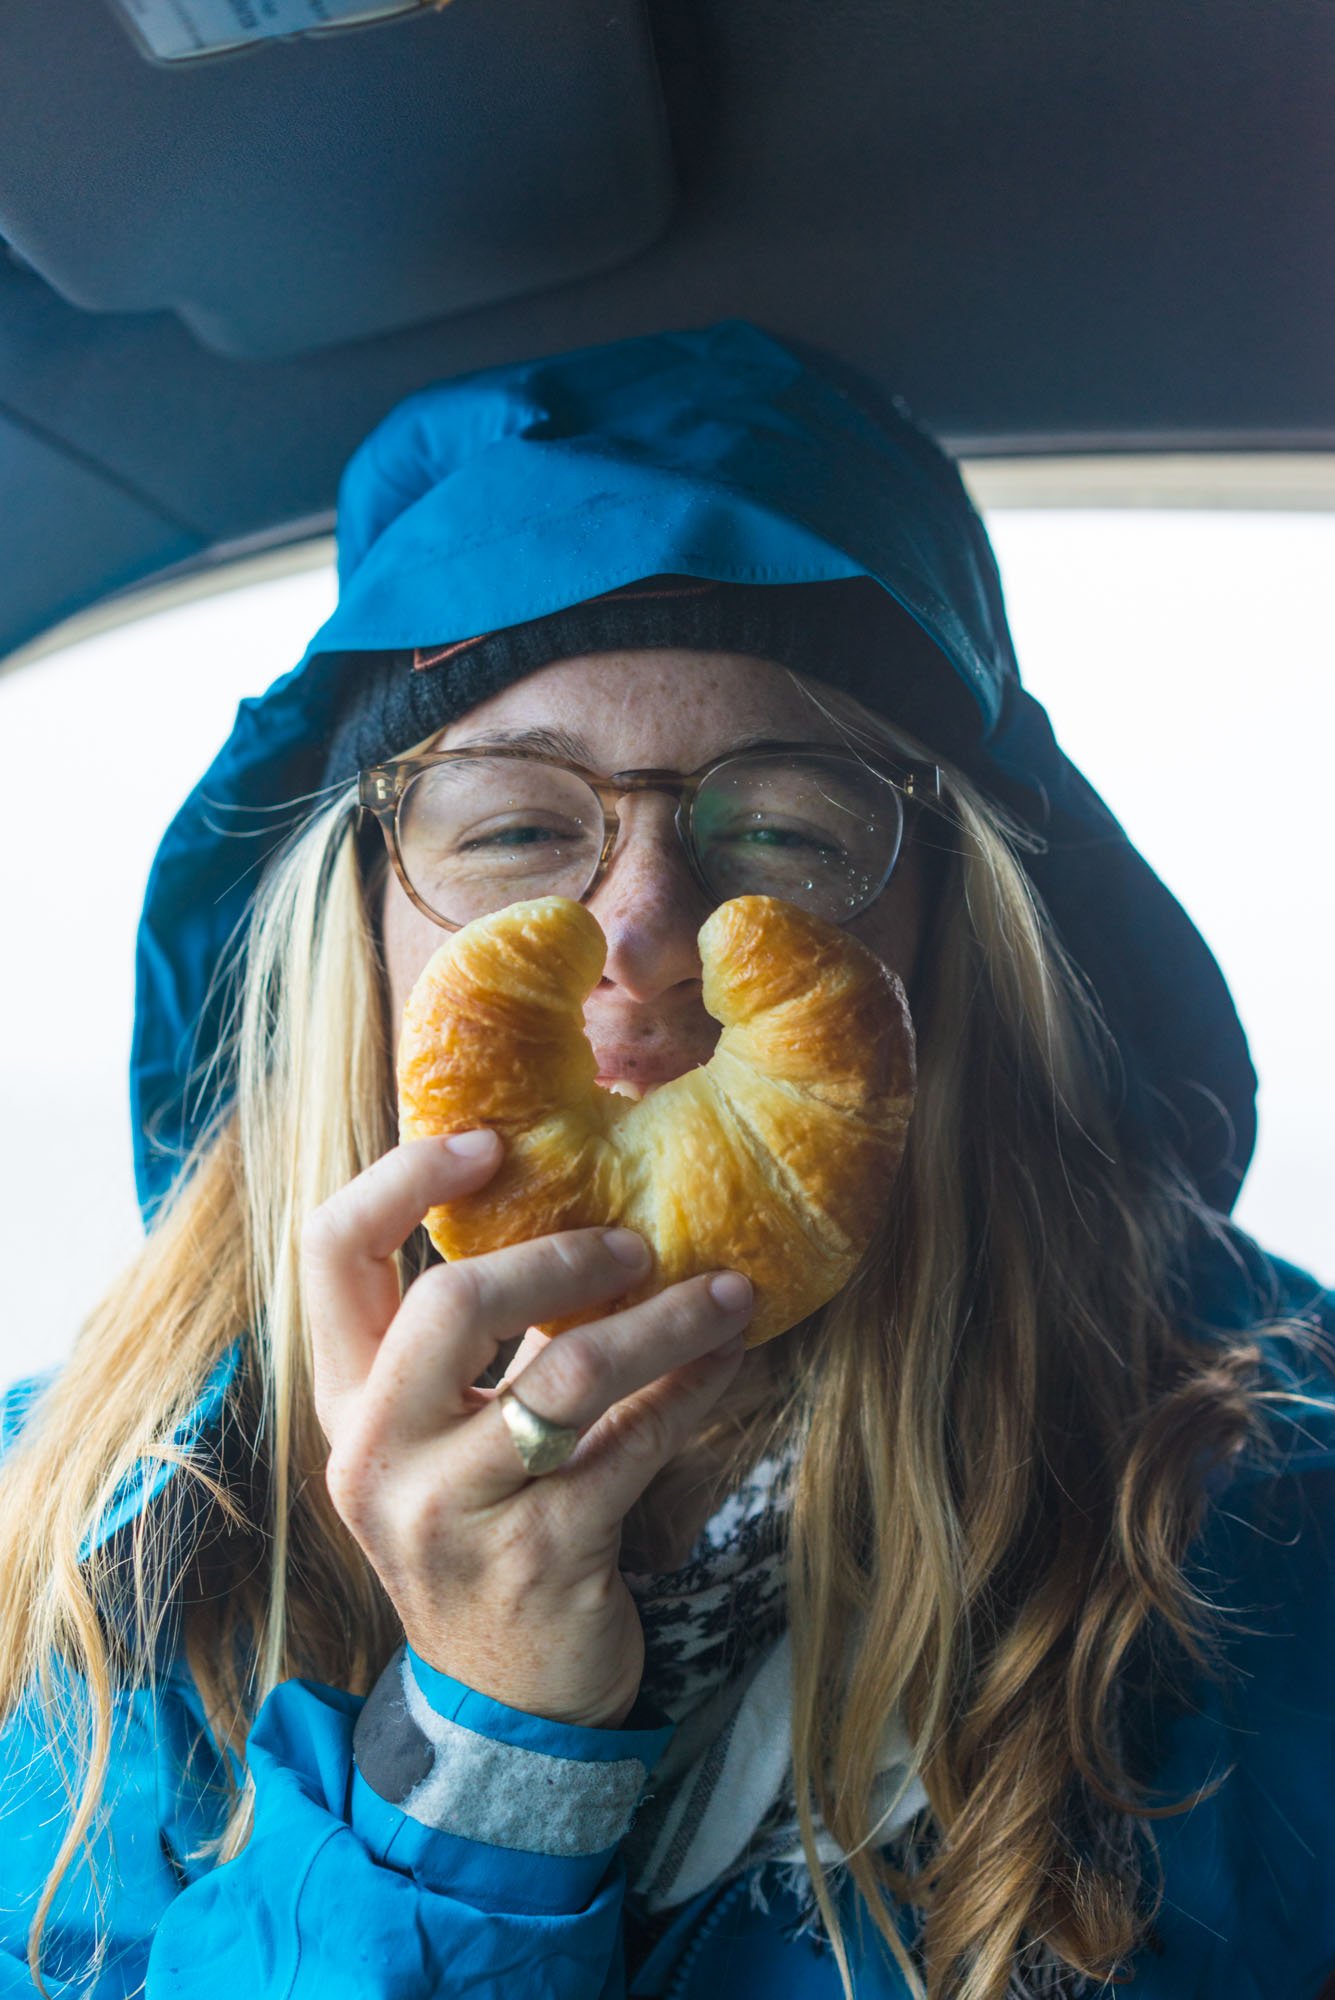  MAK enjoying a fresh croissant from the french town of Petit Étang  